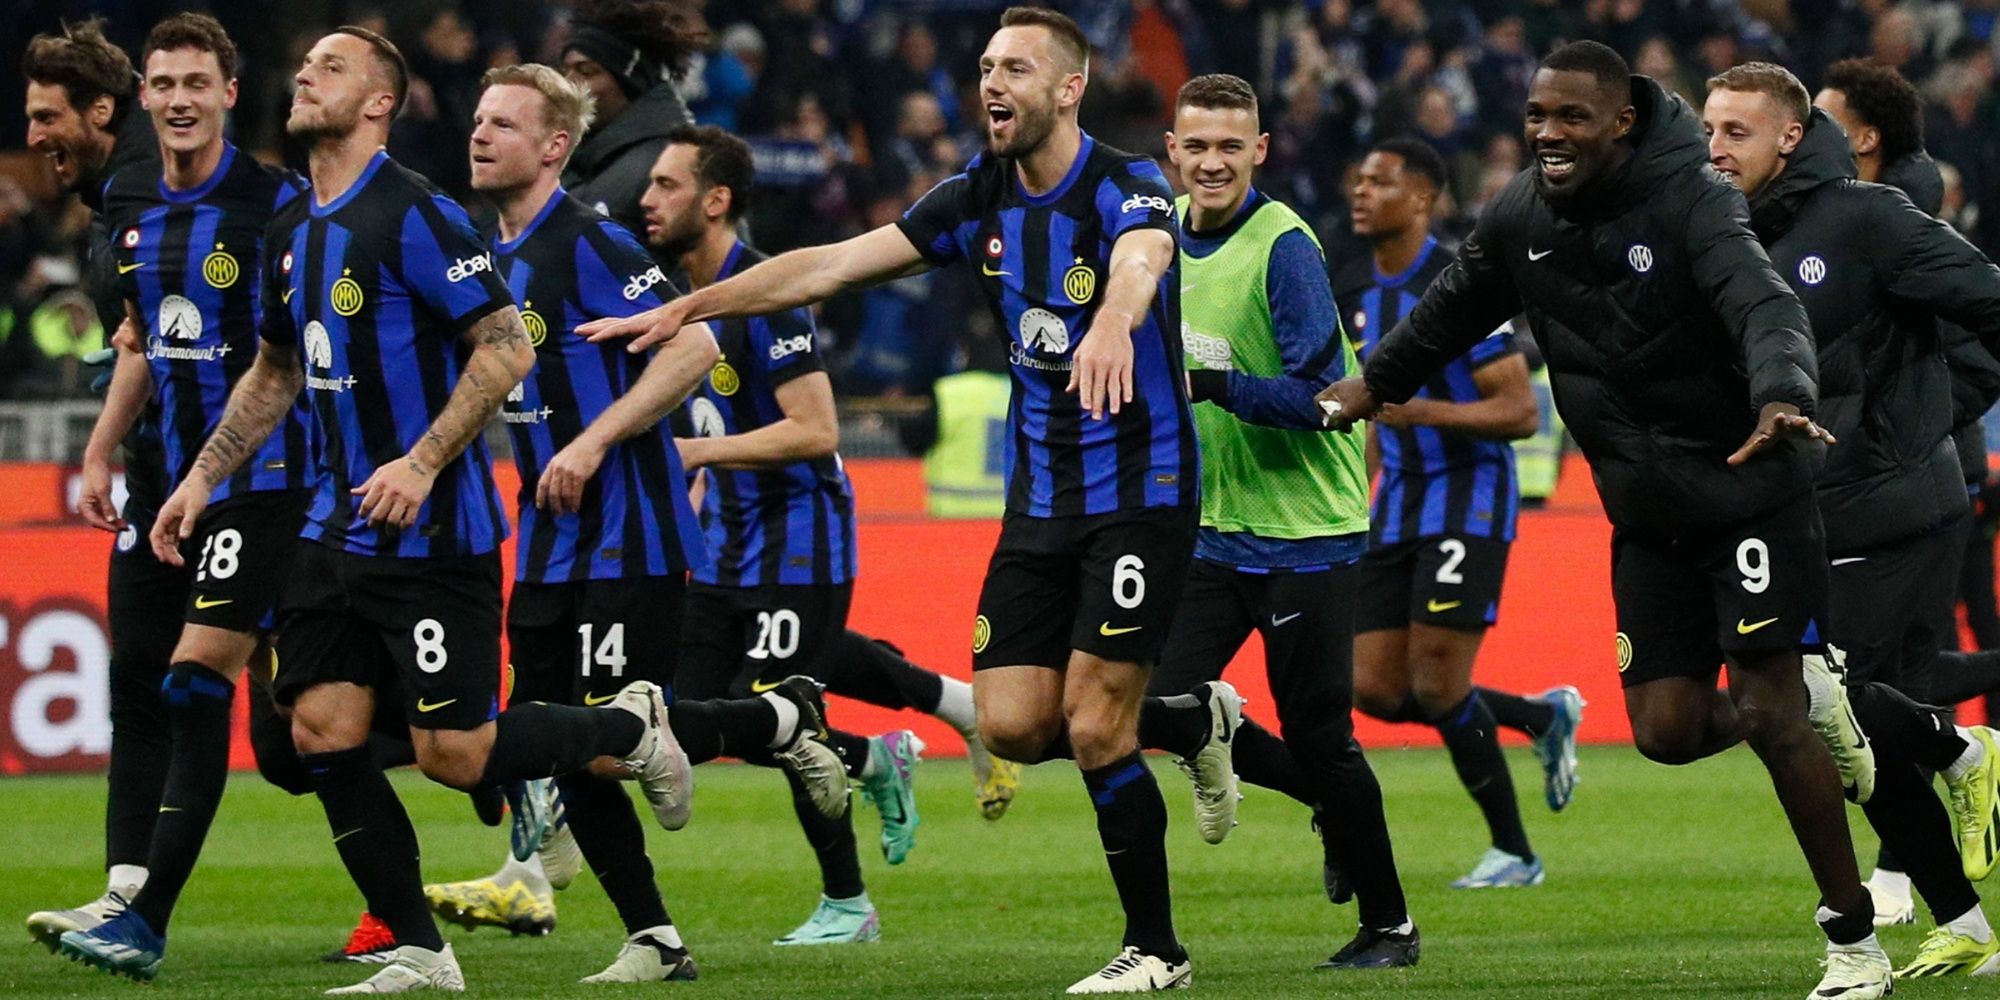 Inter Milan players celebrate after their match against Juventus.